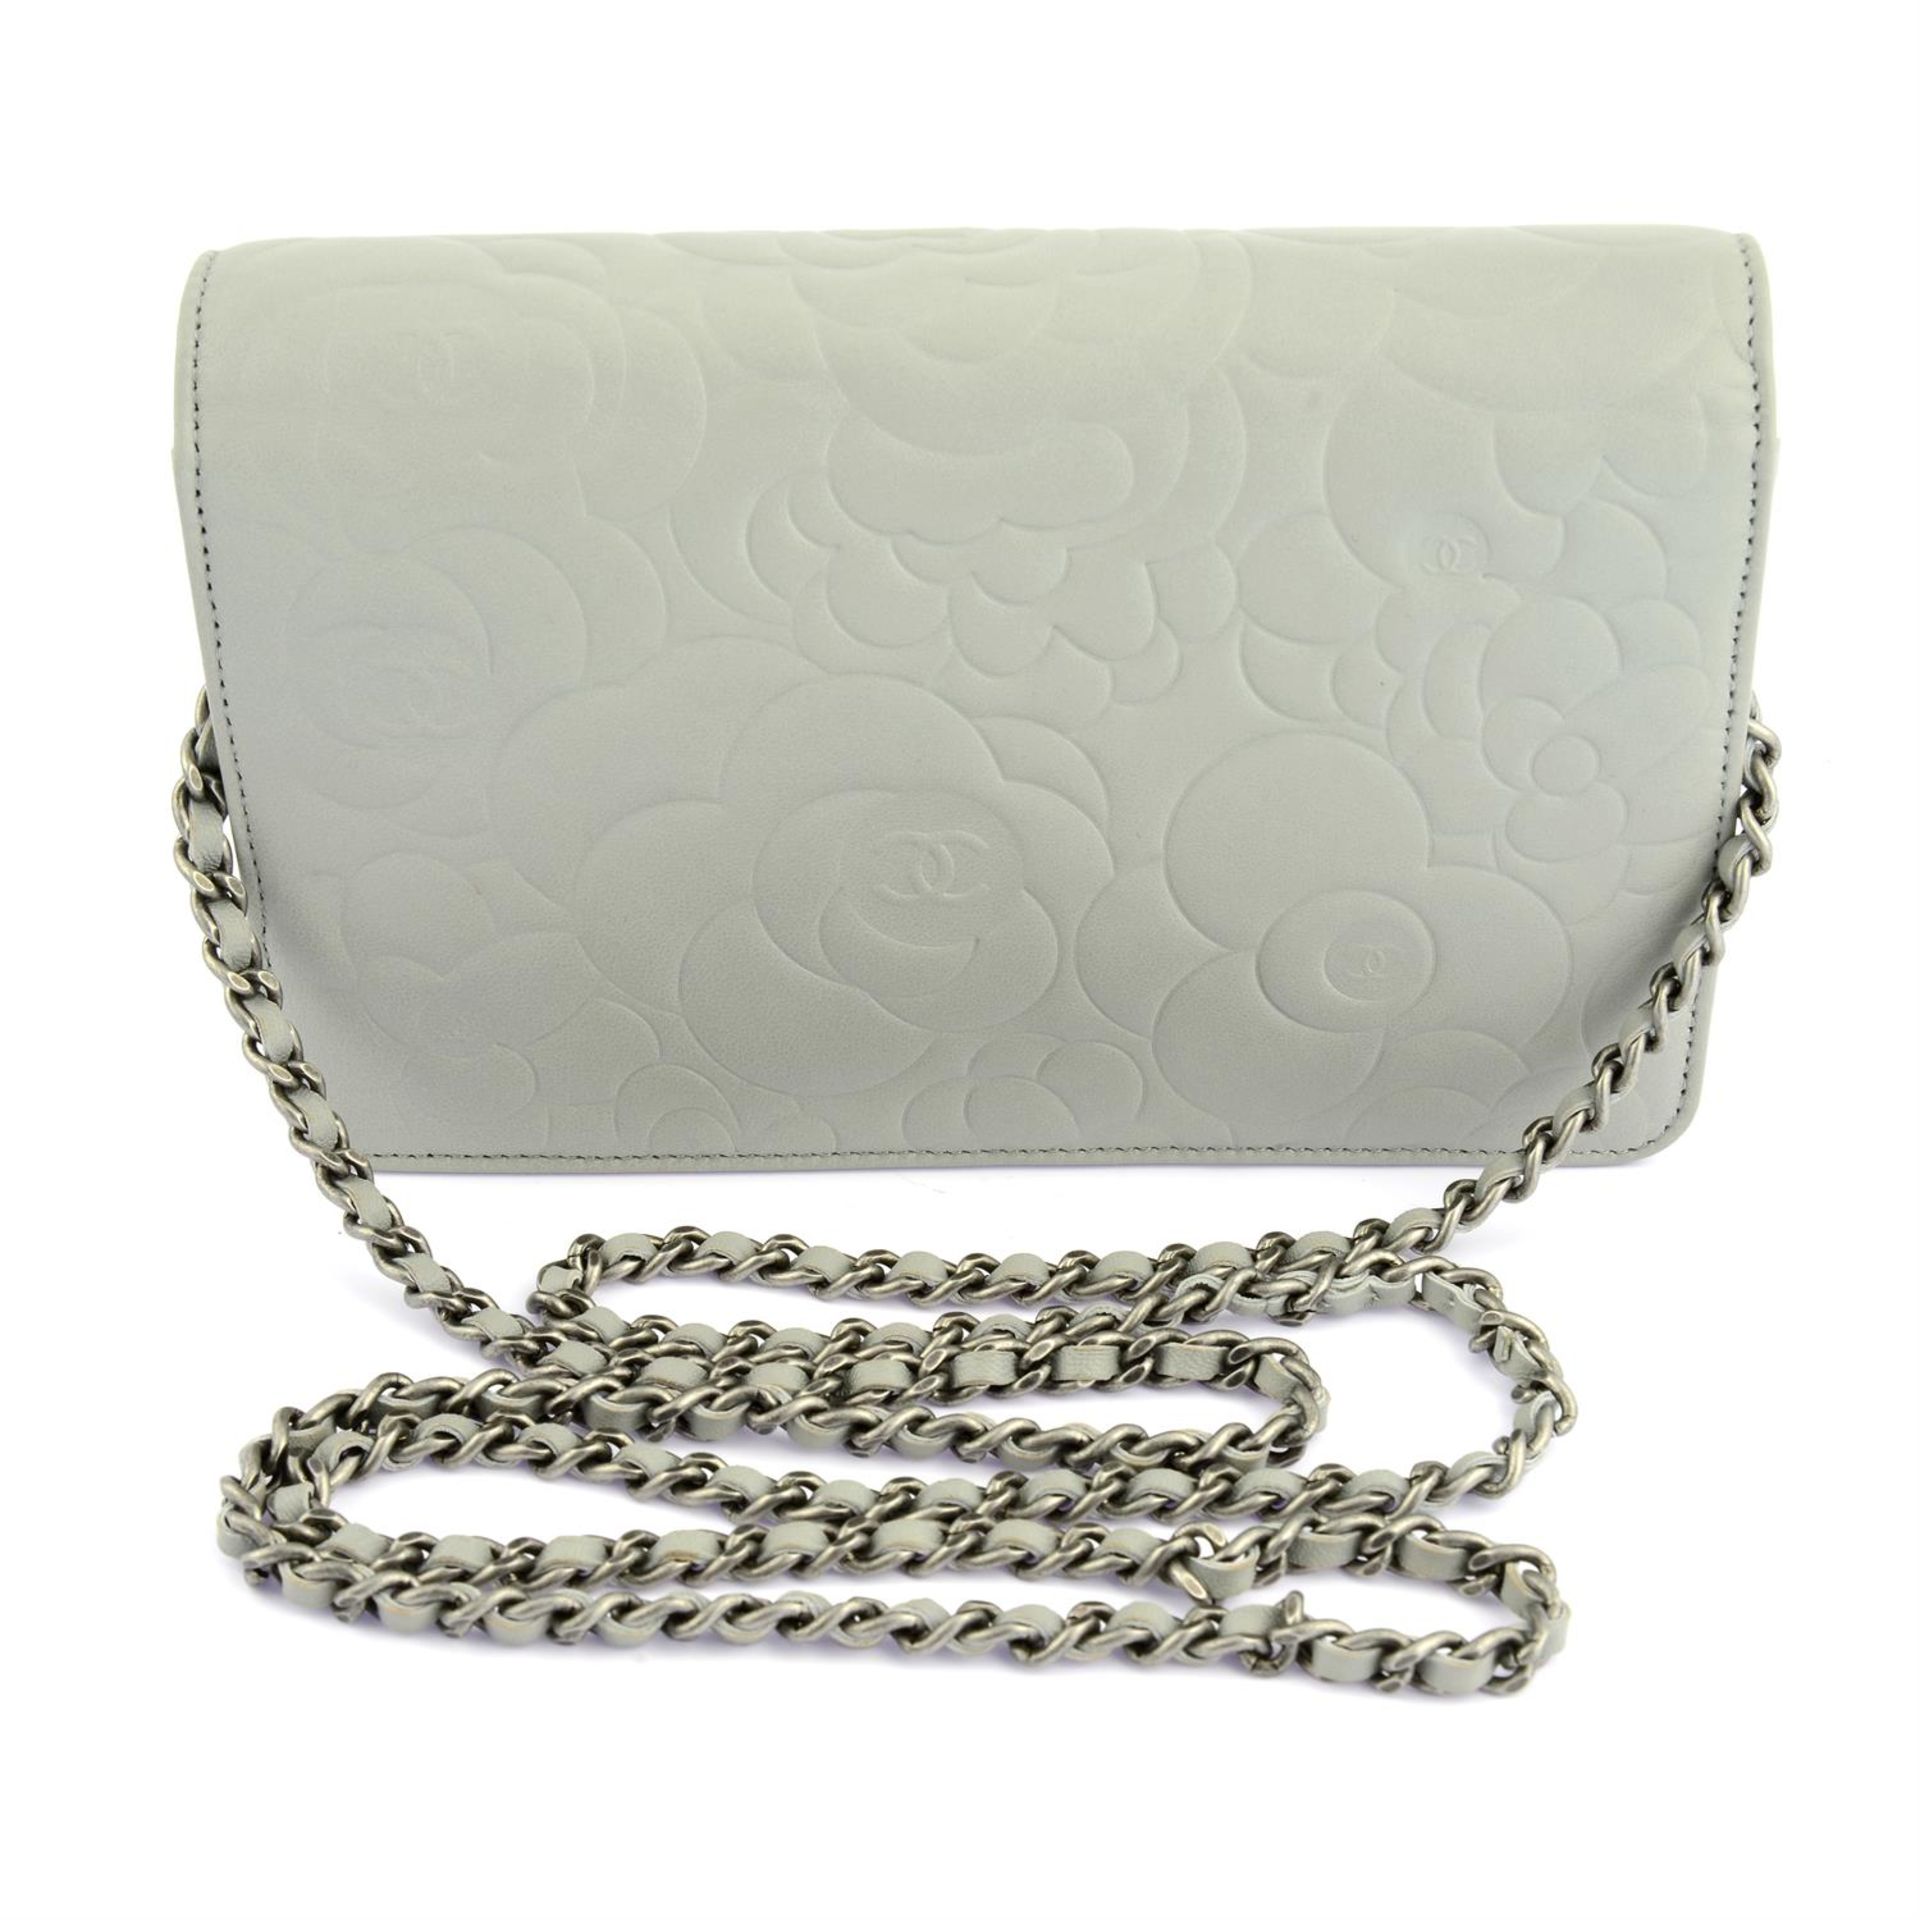 CHANEL - a light grey Camelia embossed leather wallet on chain. - Image 2 of 6